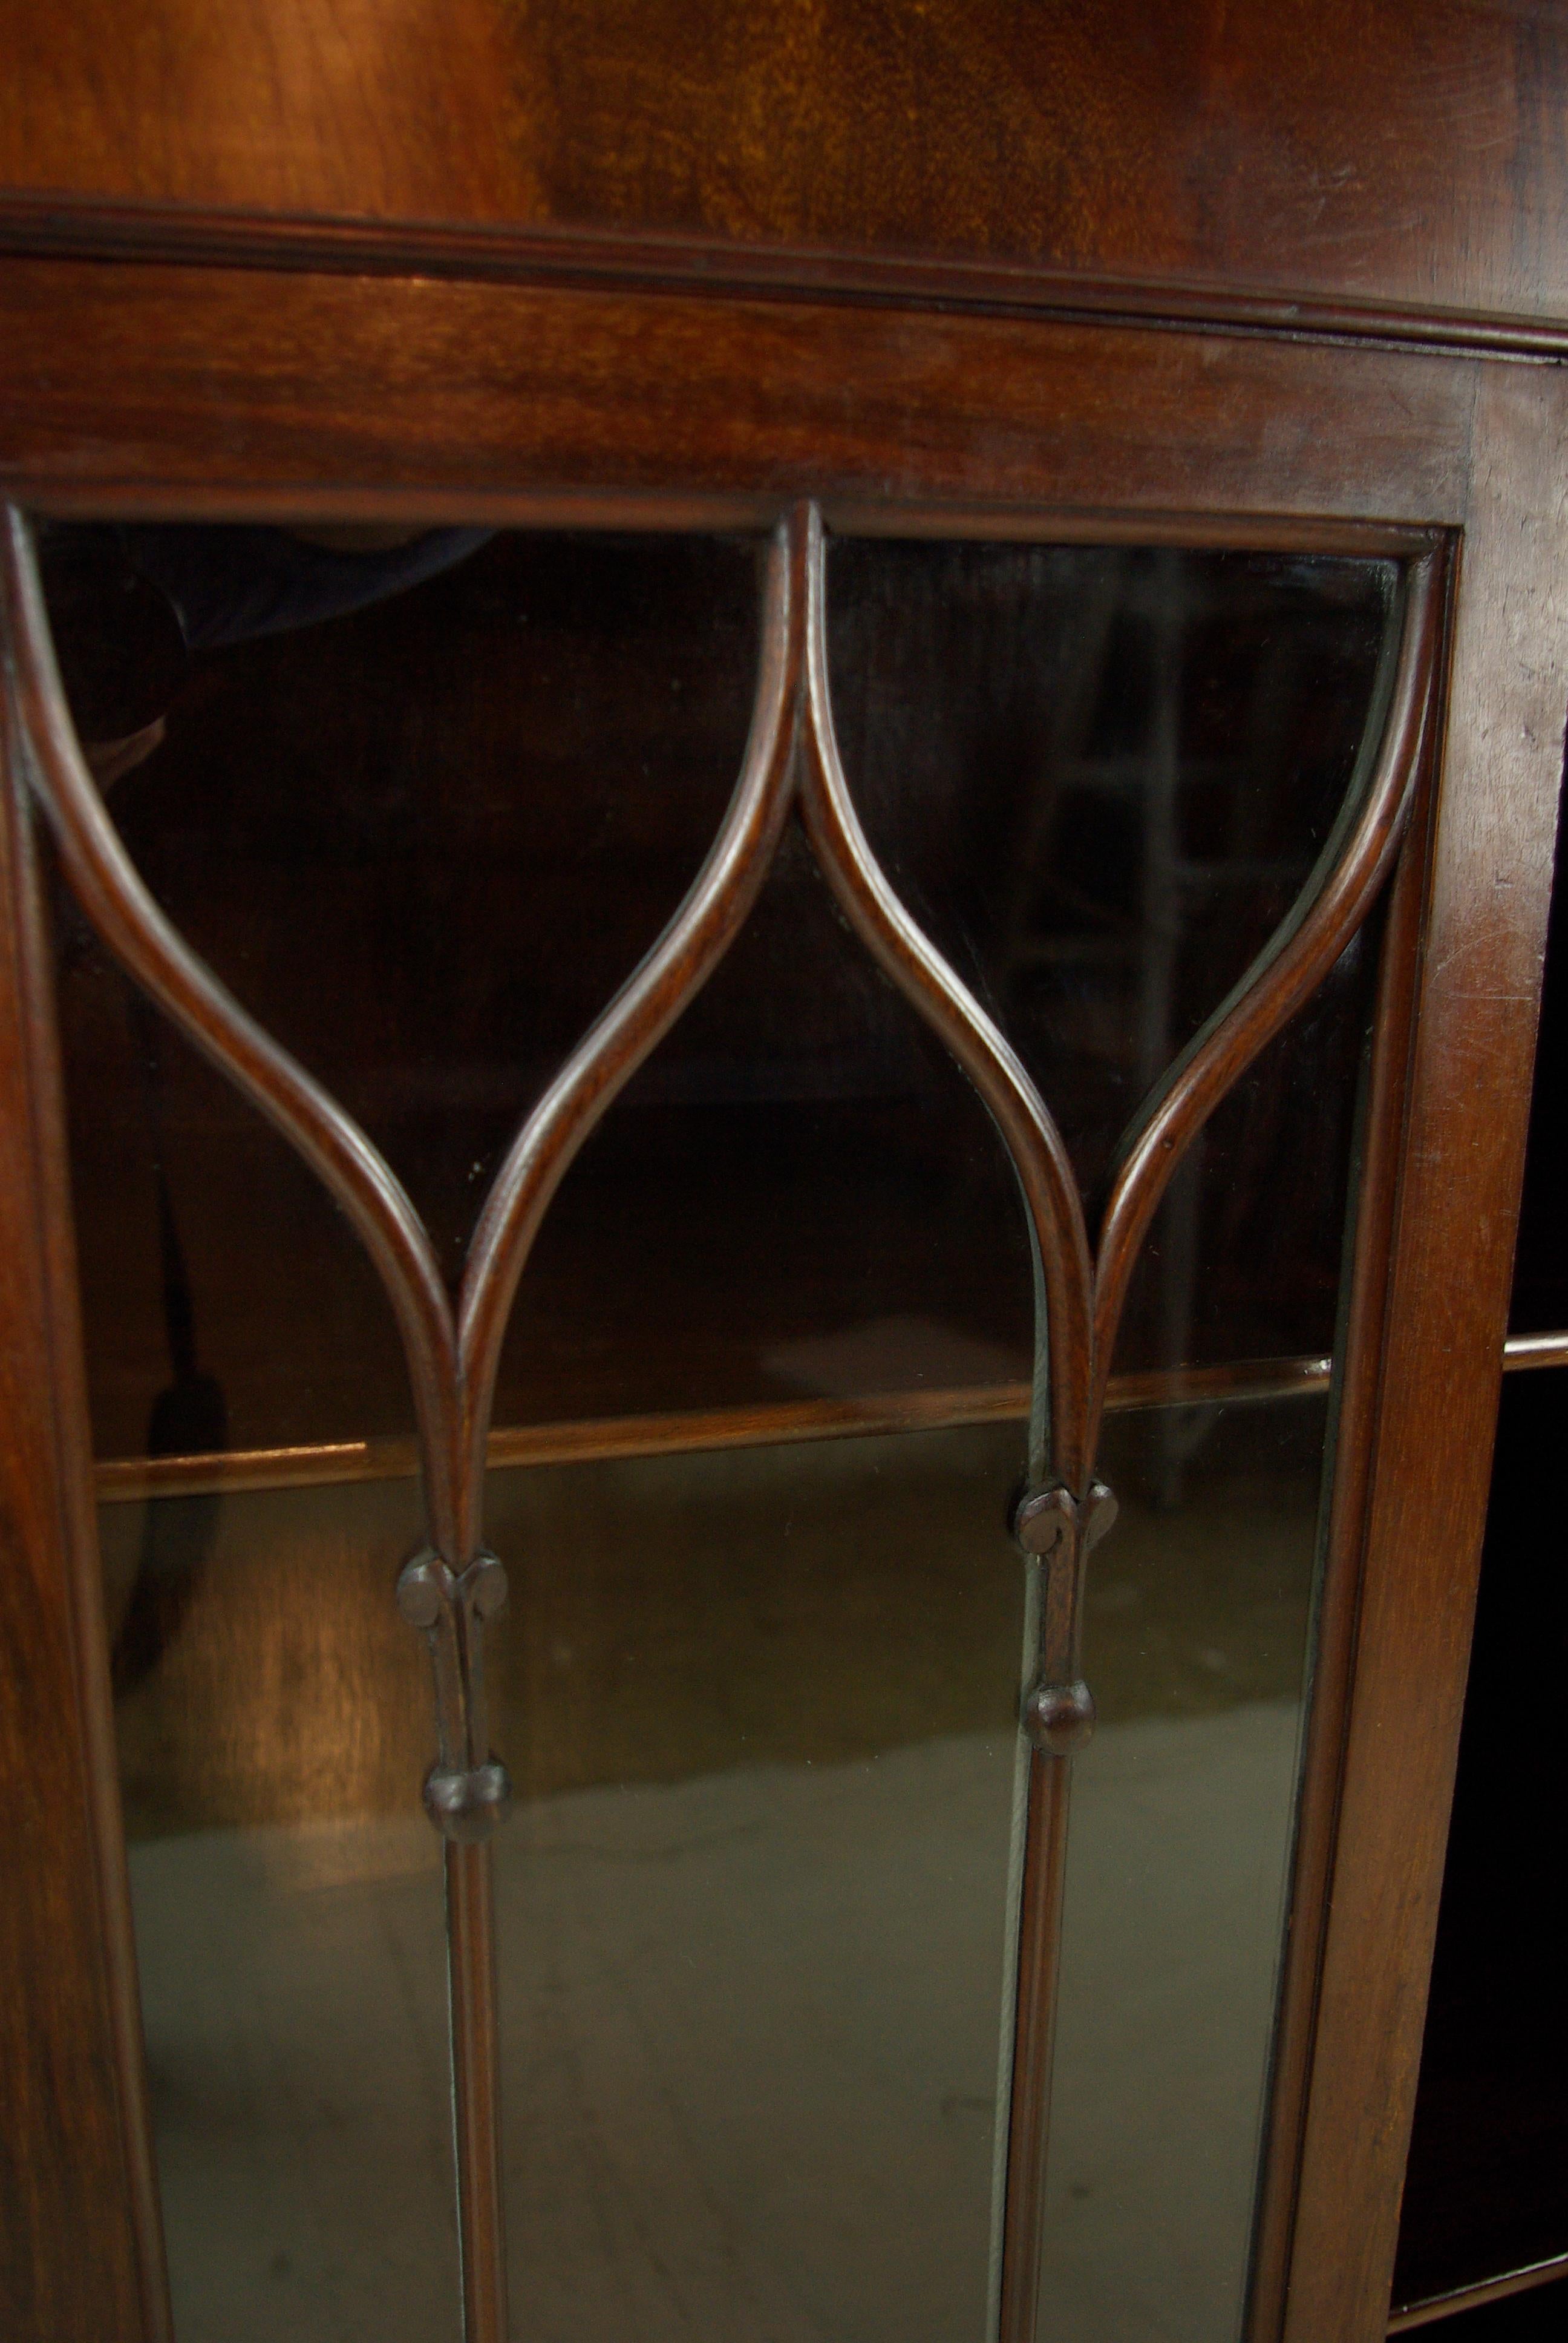 Hand-Crafted Antique Mahogany Bookcase, Breakfront, Scotland 1900, B1026 GREATLY REDUCED!!!